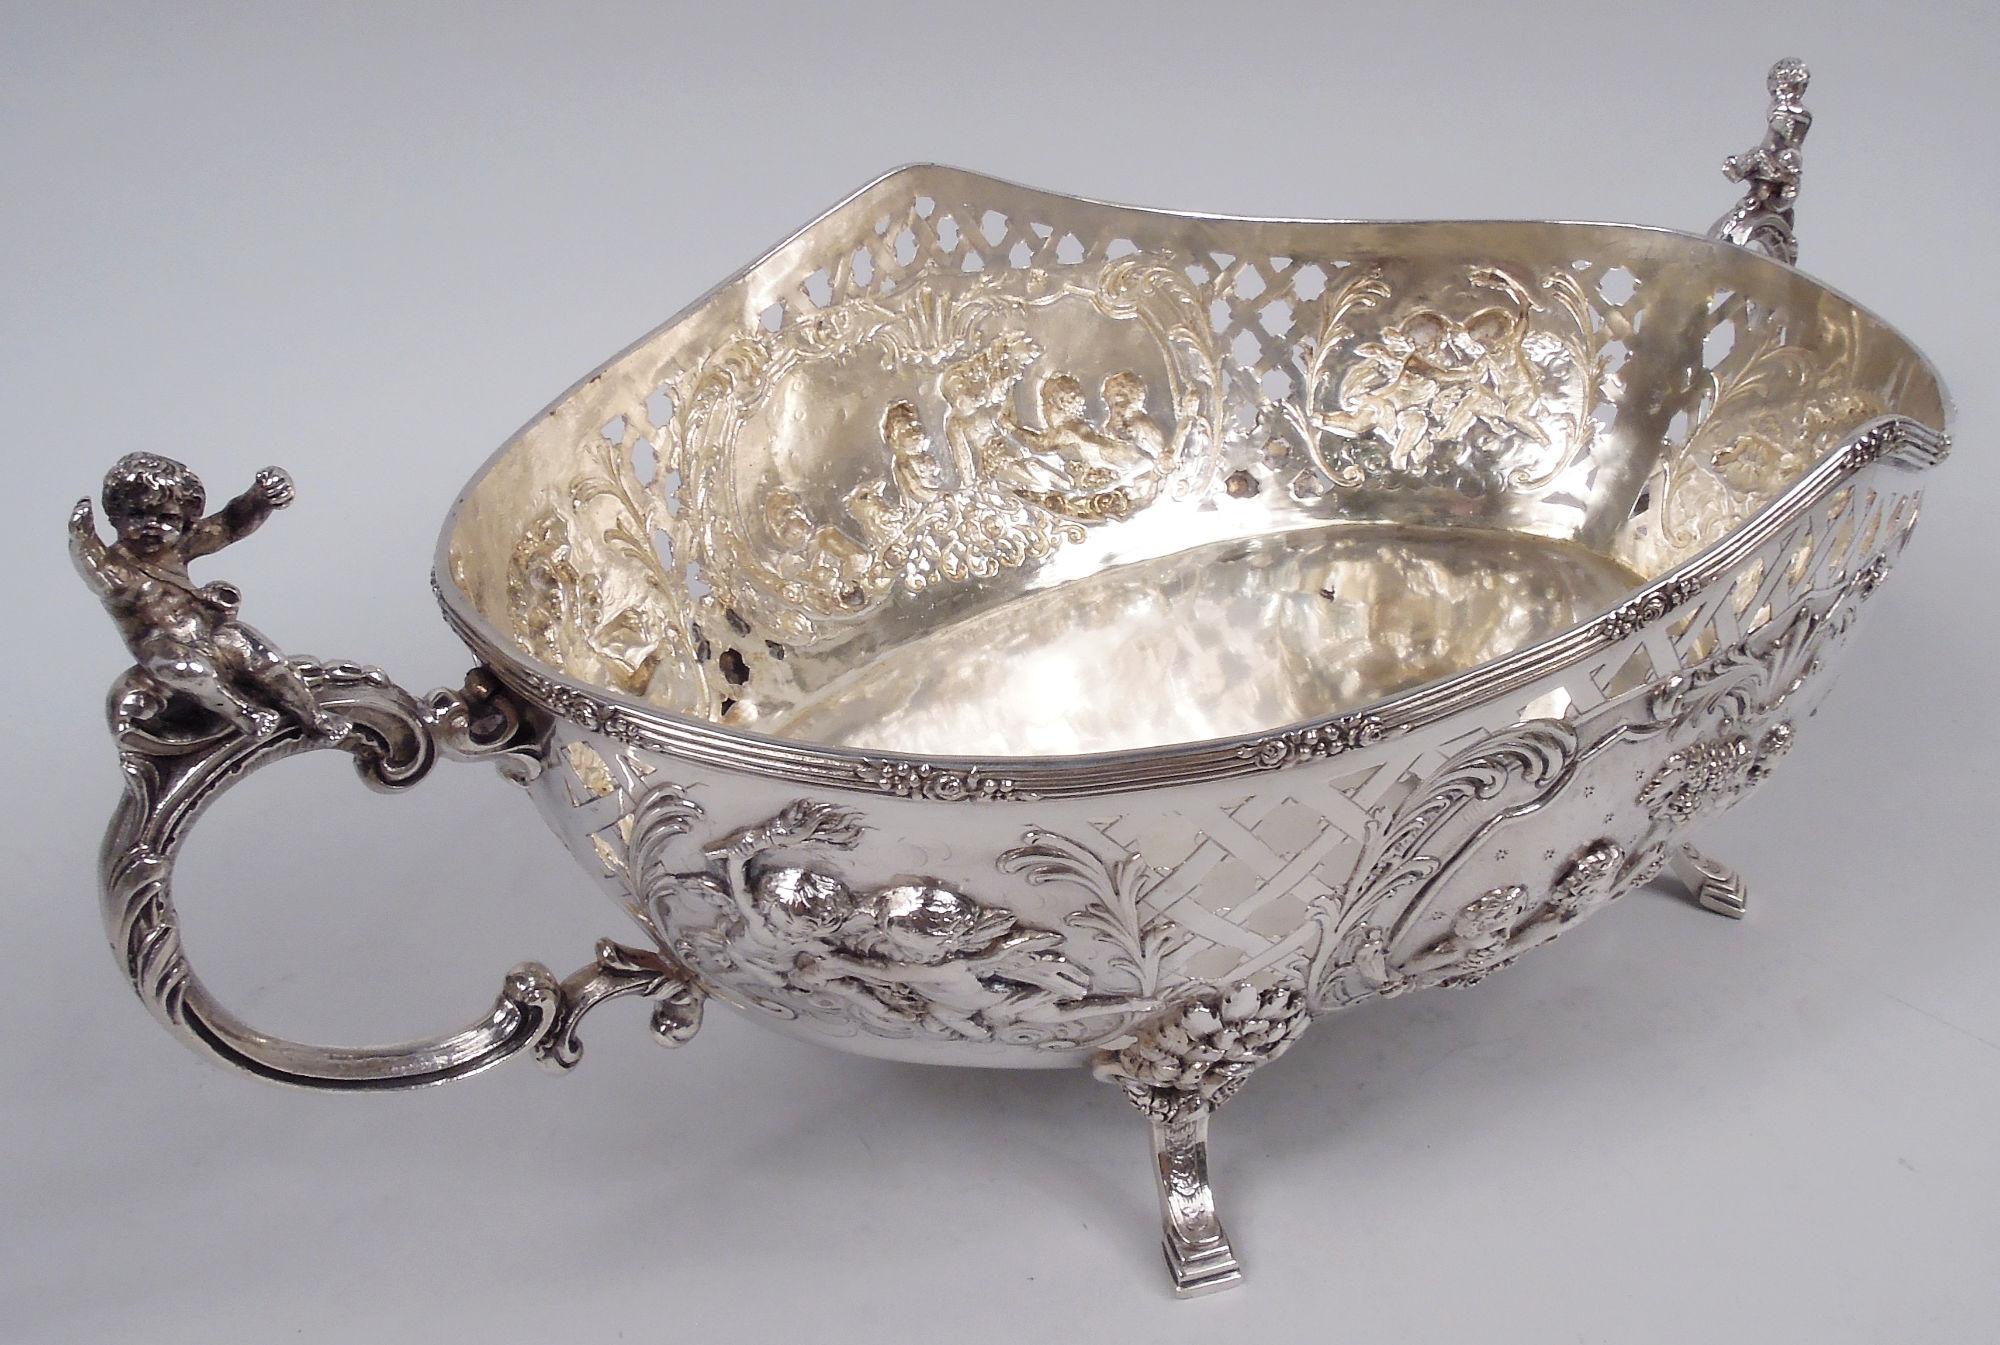 German Classical 800 silver centerpiece, ca 1910. Solid oval well and curved sides with reeded rim, open basketweave, and chased and engraved ornament: Leafing scroll frames inhabited by cherubs feasting on grapes in company of a goat as well as